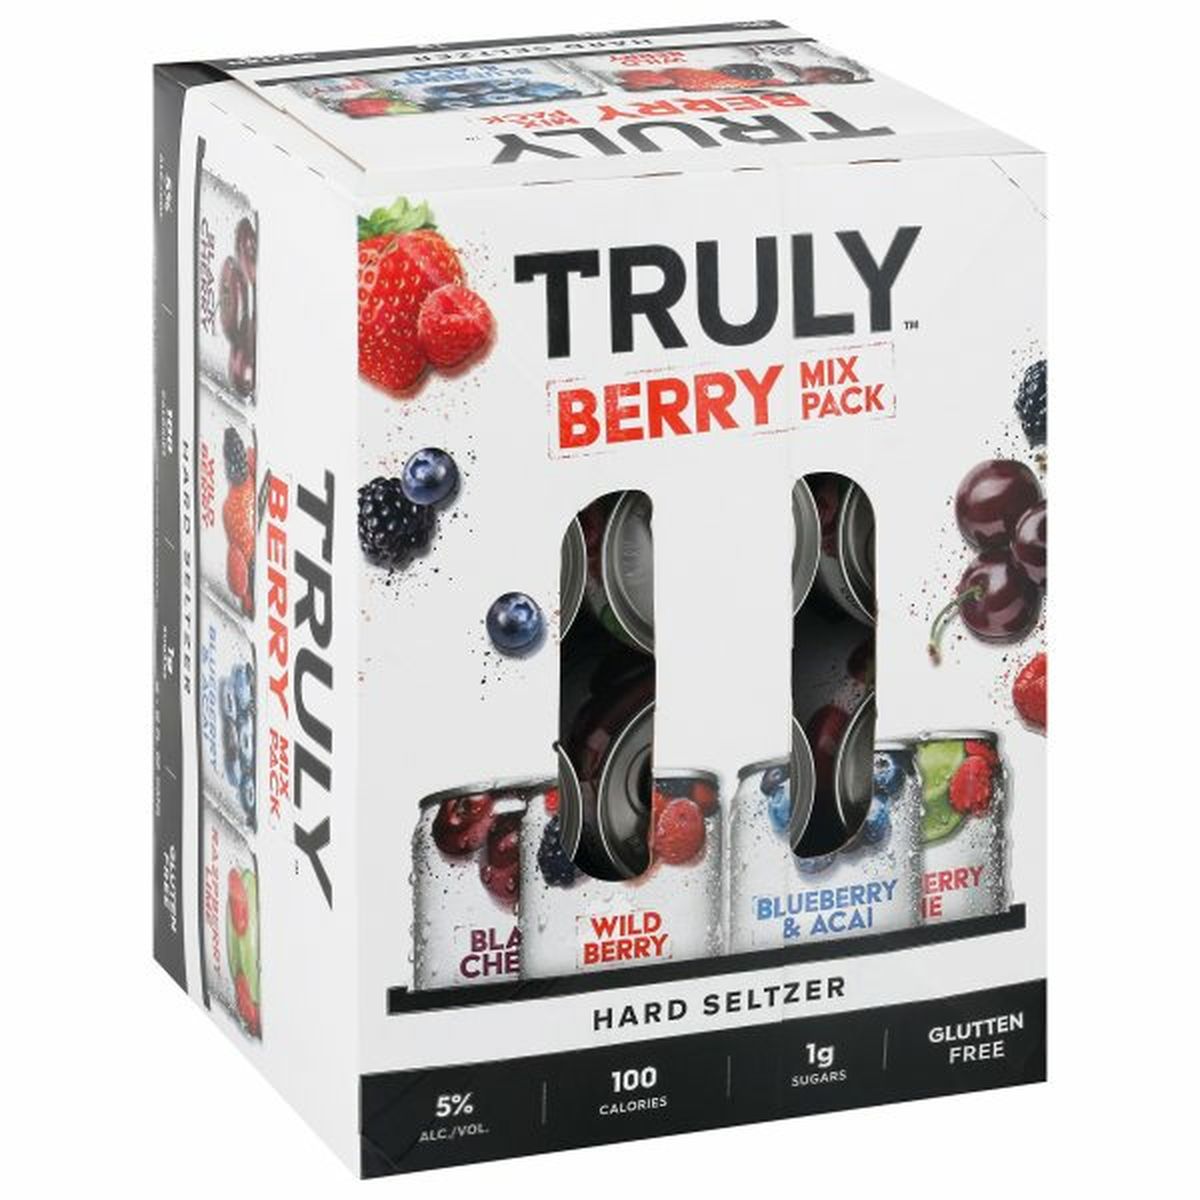 Calories in TRULY Hard Seltzer Berry Mix Pack 12/12 oz cans